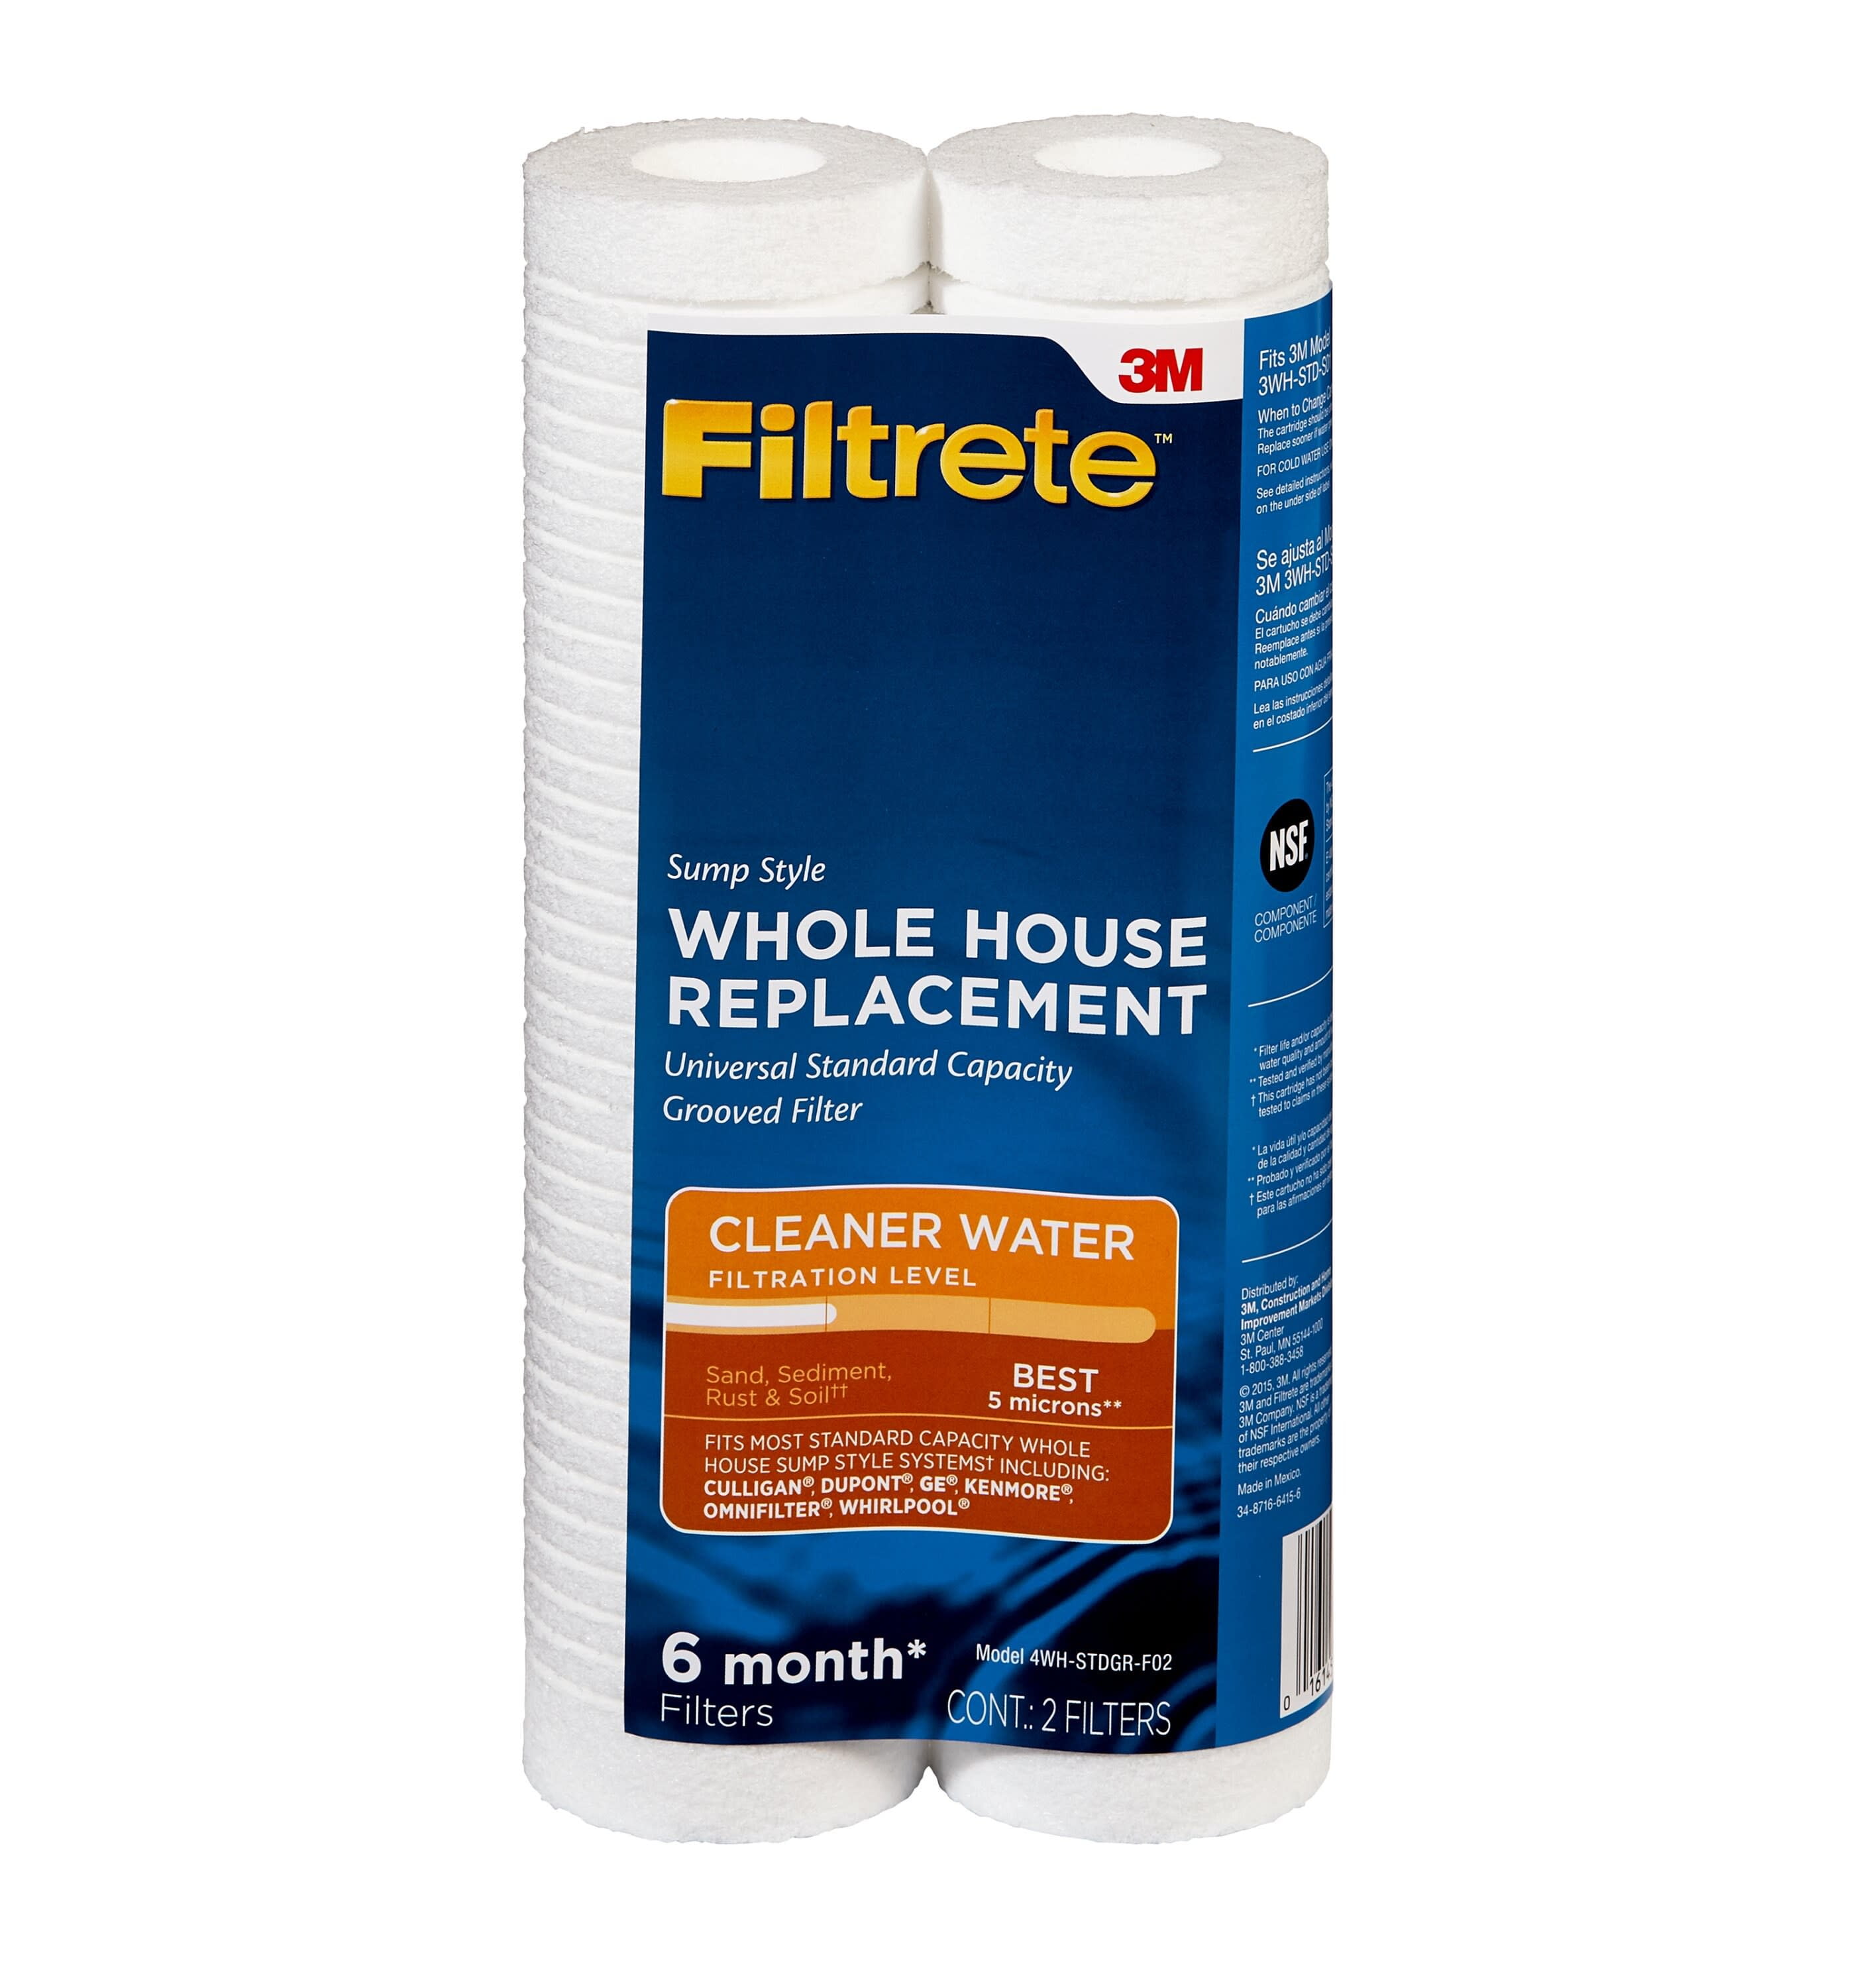 3m 4wh-Stdgr-F02 Filtrete Standard Whole House Replacenment Filter 2 Count